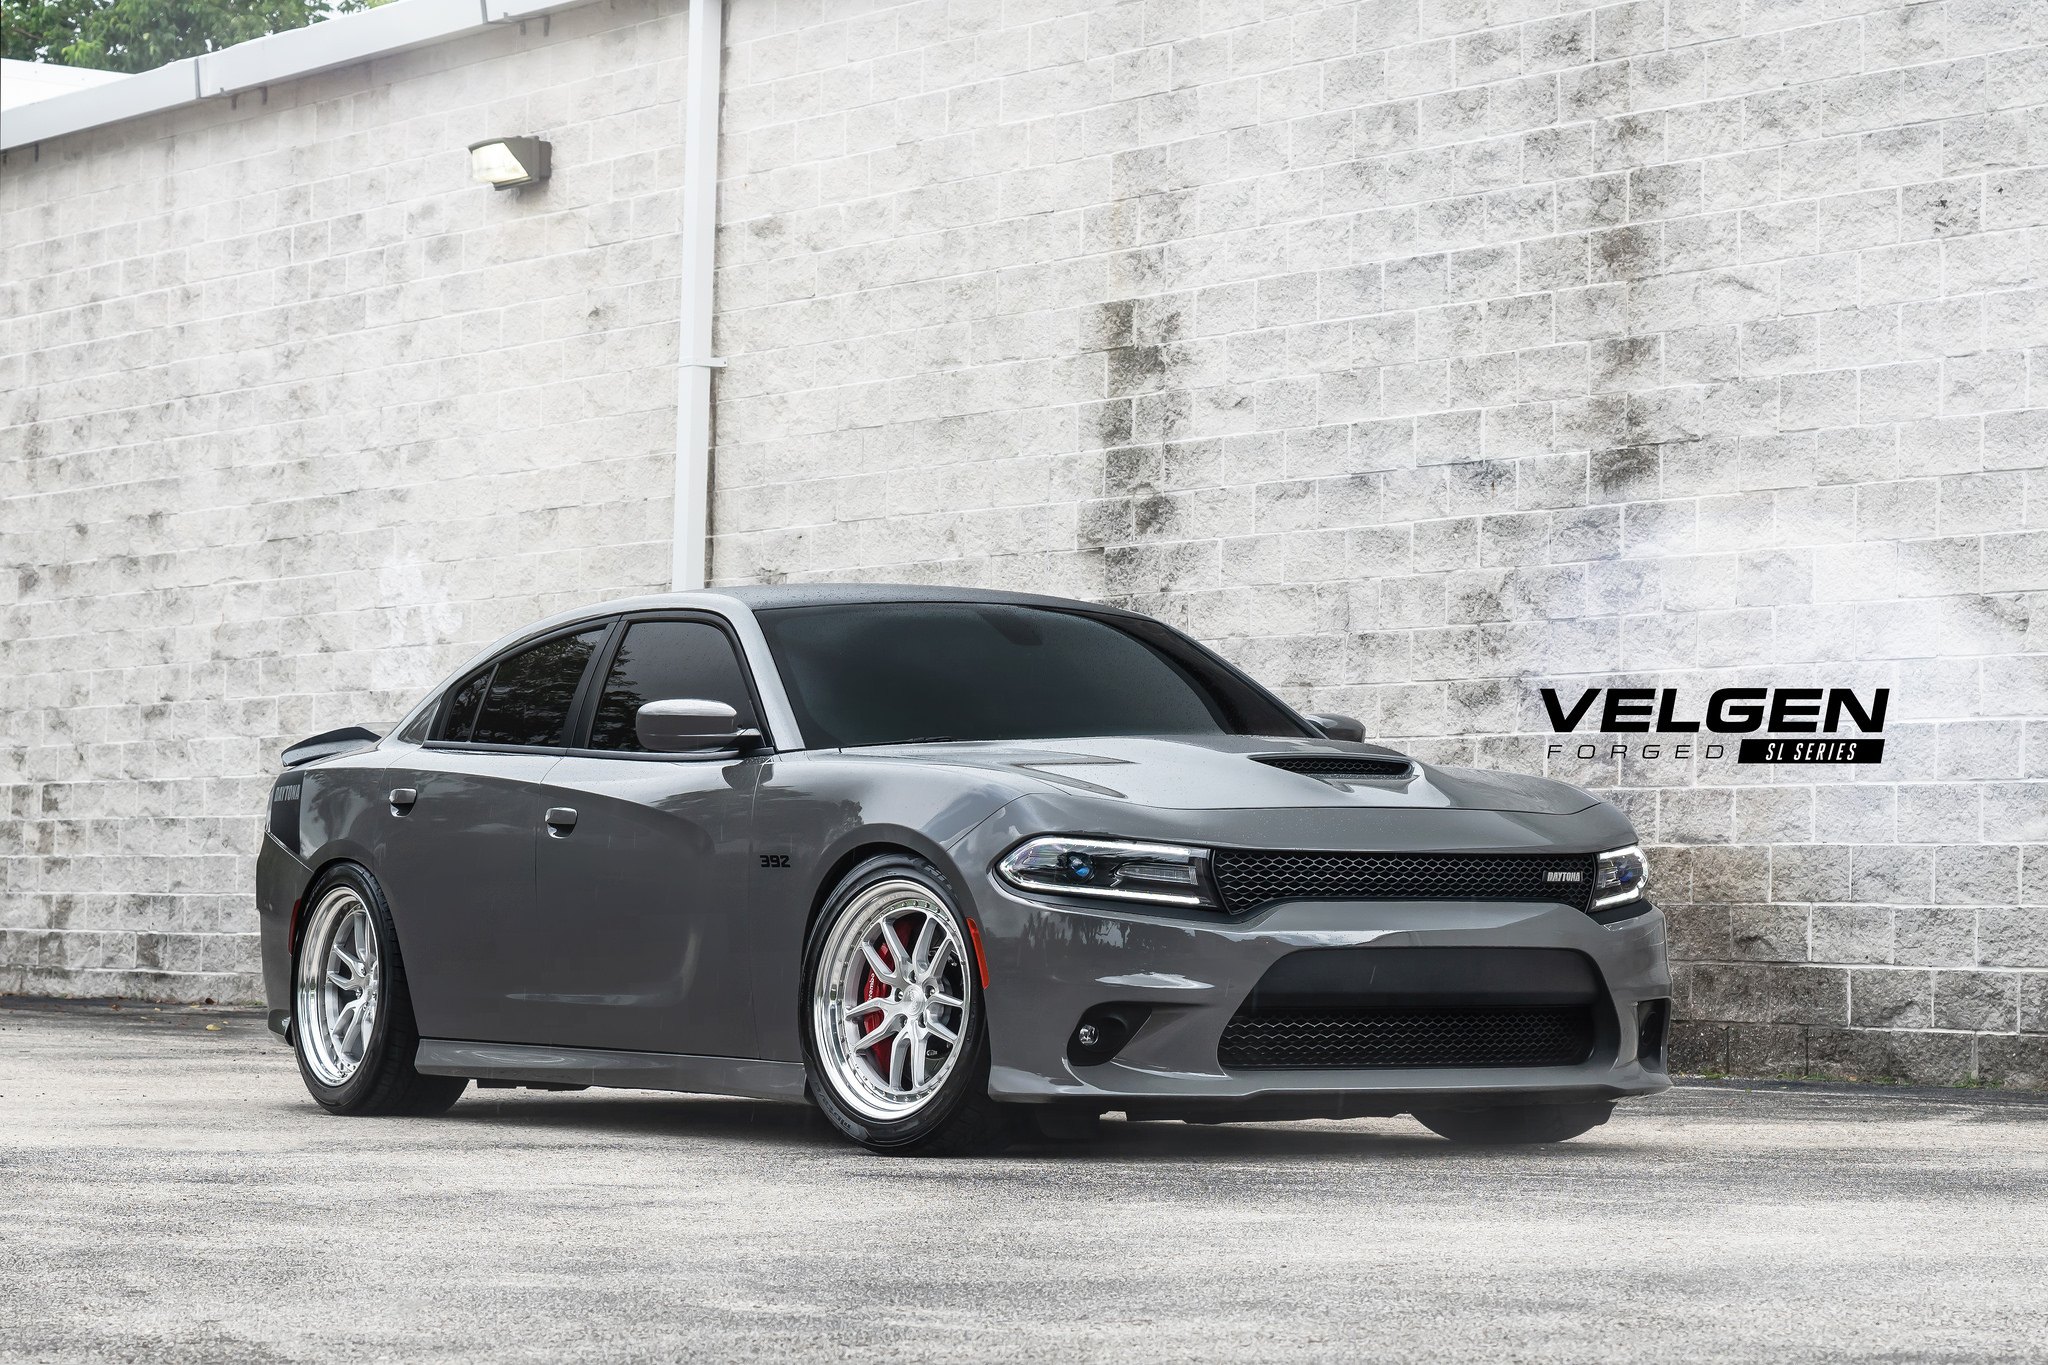 Gray Dodge Charger Daytona with Blacked Out Mesh Grille - Photo by Velgen Wheels